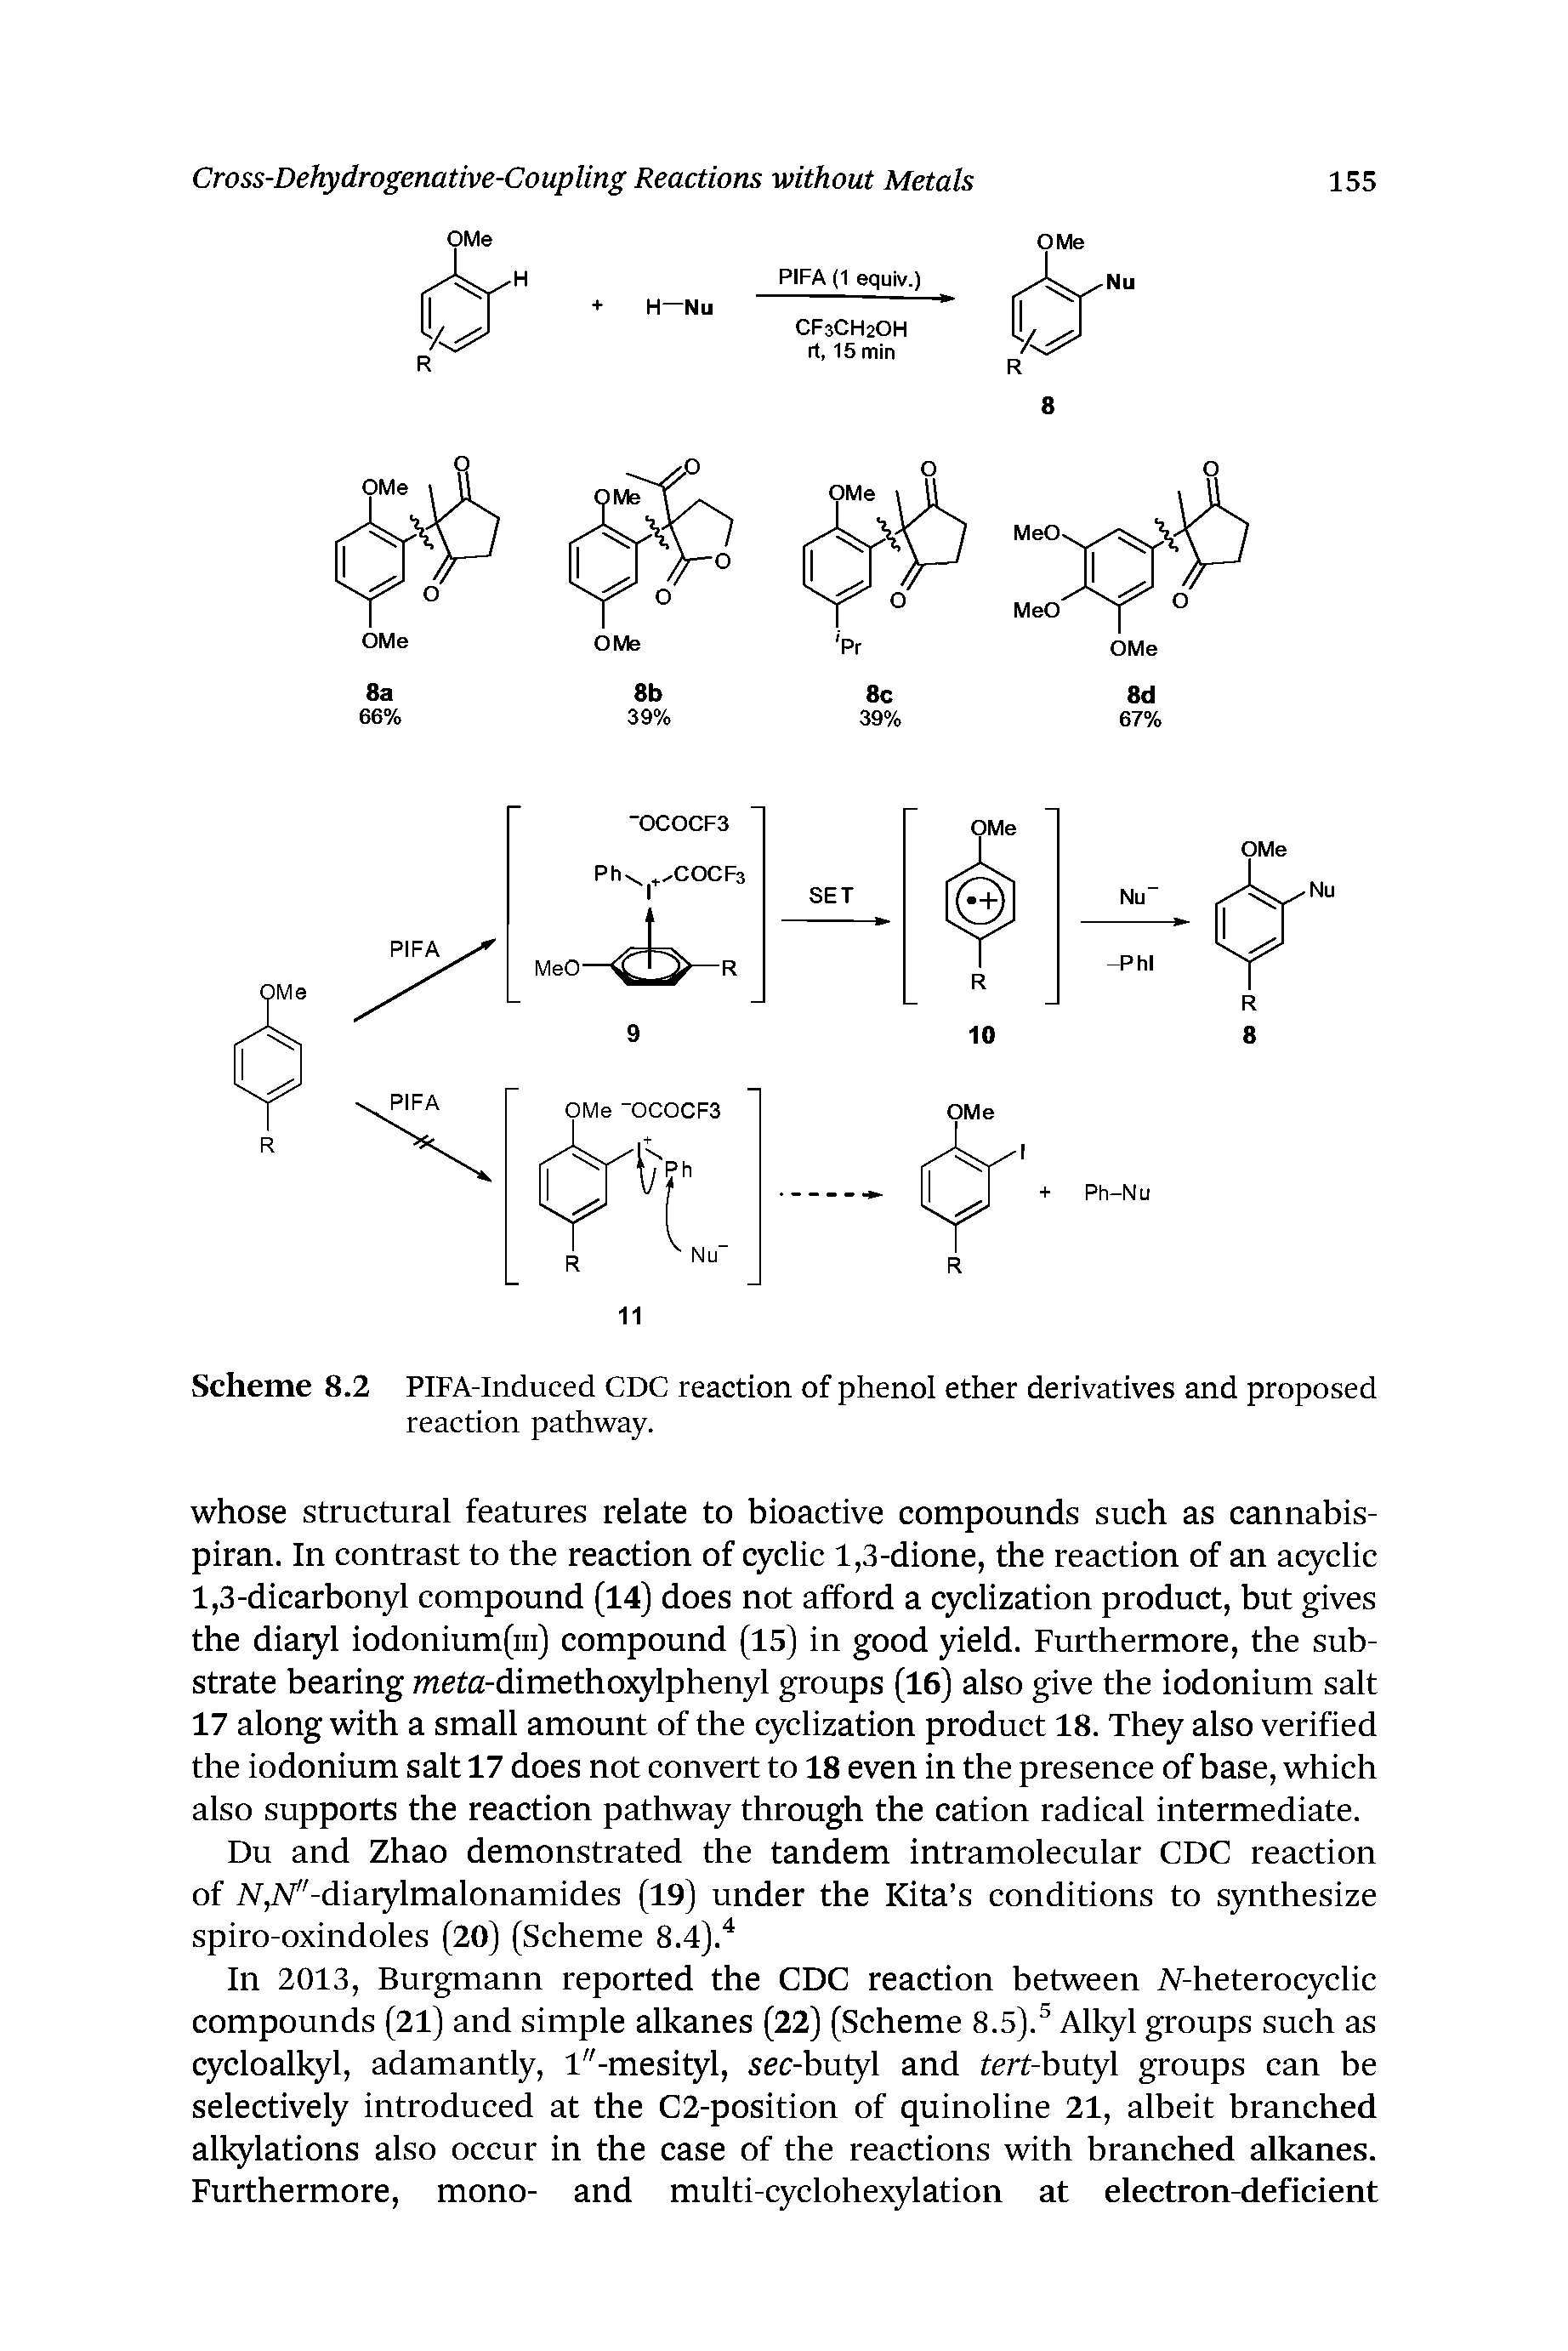 Scheme 8.2 PIFA-Induced CDC reaction of phenol ether derivatives and proposed reaction pathway.